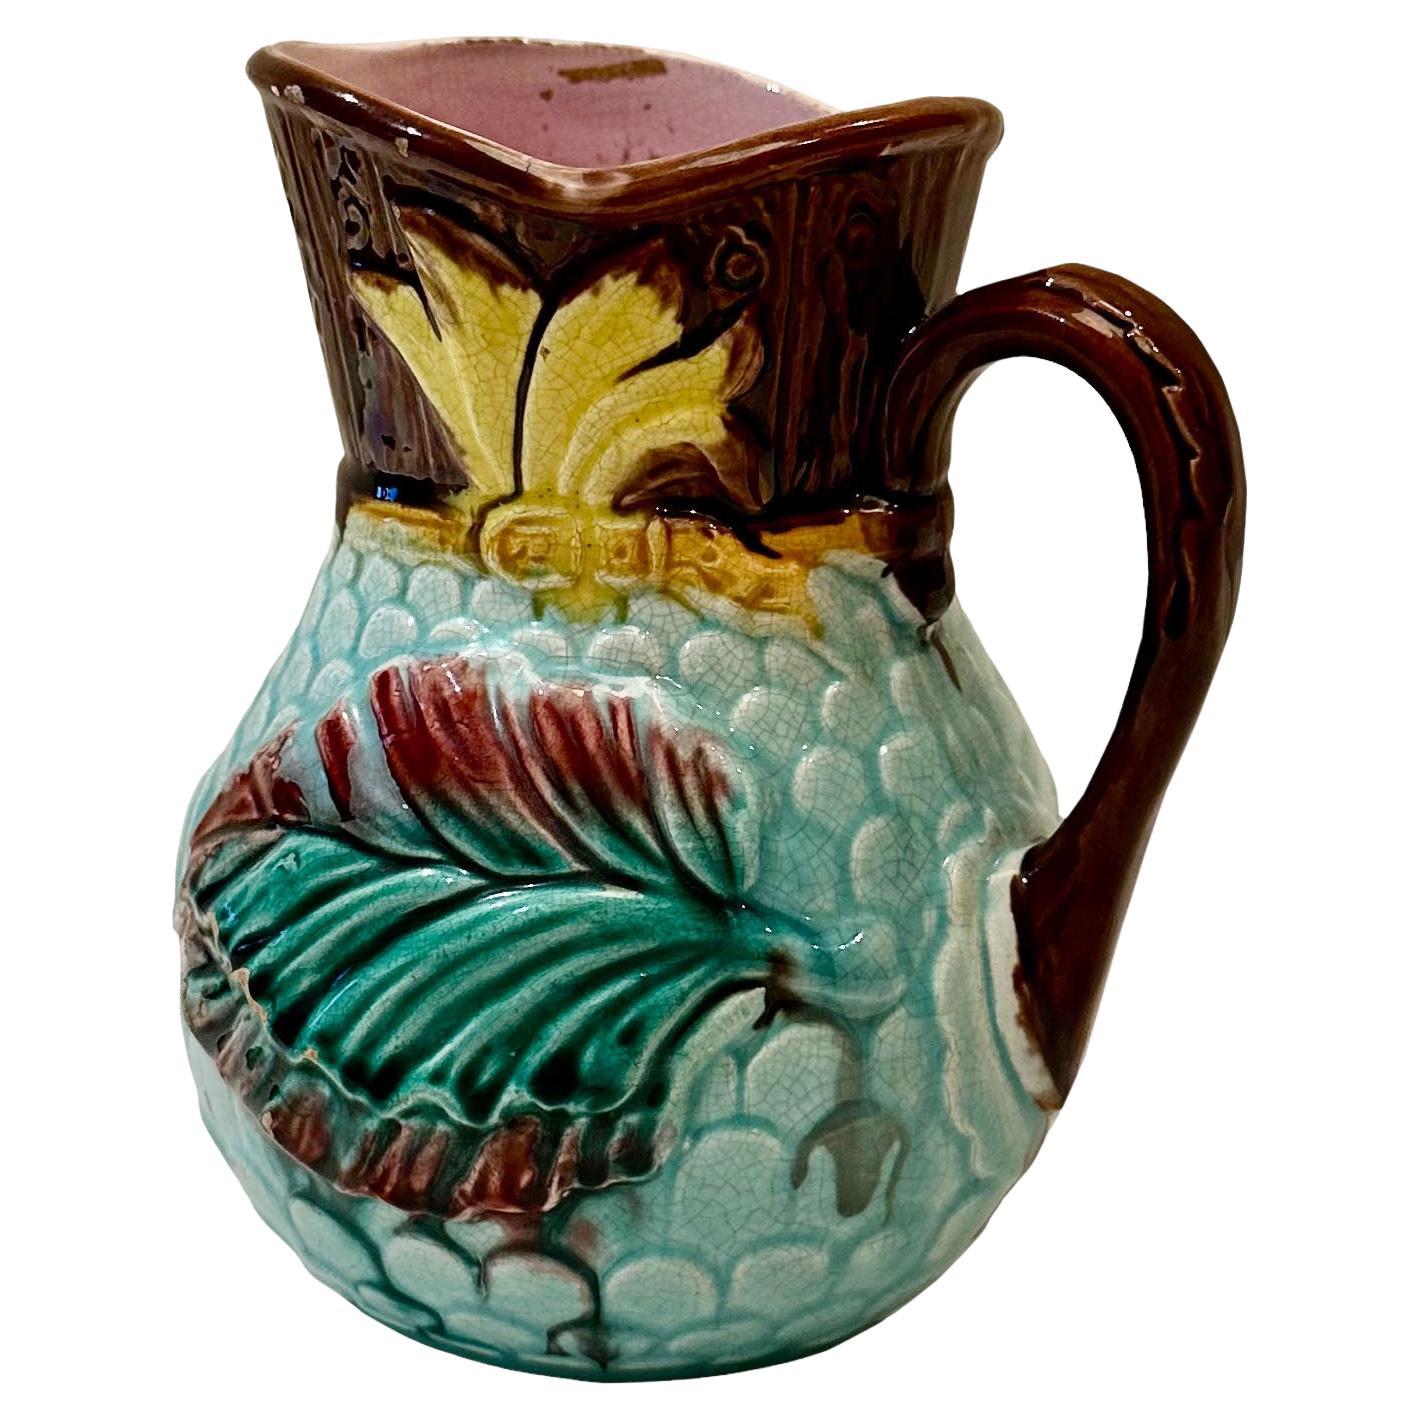 An antique Majolica leaf pitcher in beautiful shades of aqua, yellow, green and brown with a pink interior. England, circa 1890s.